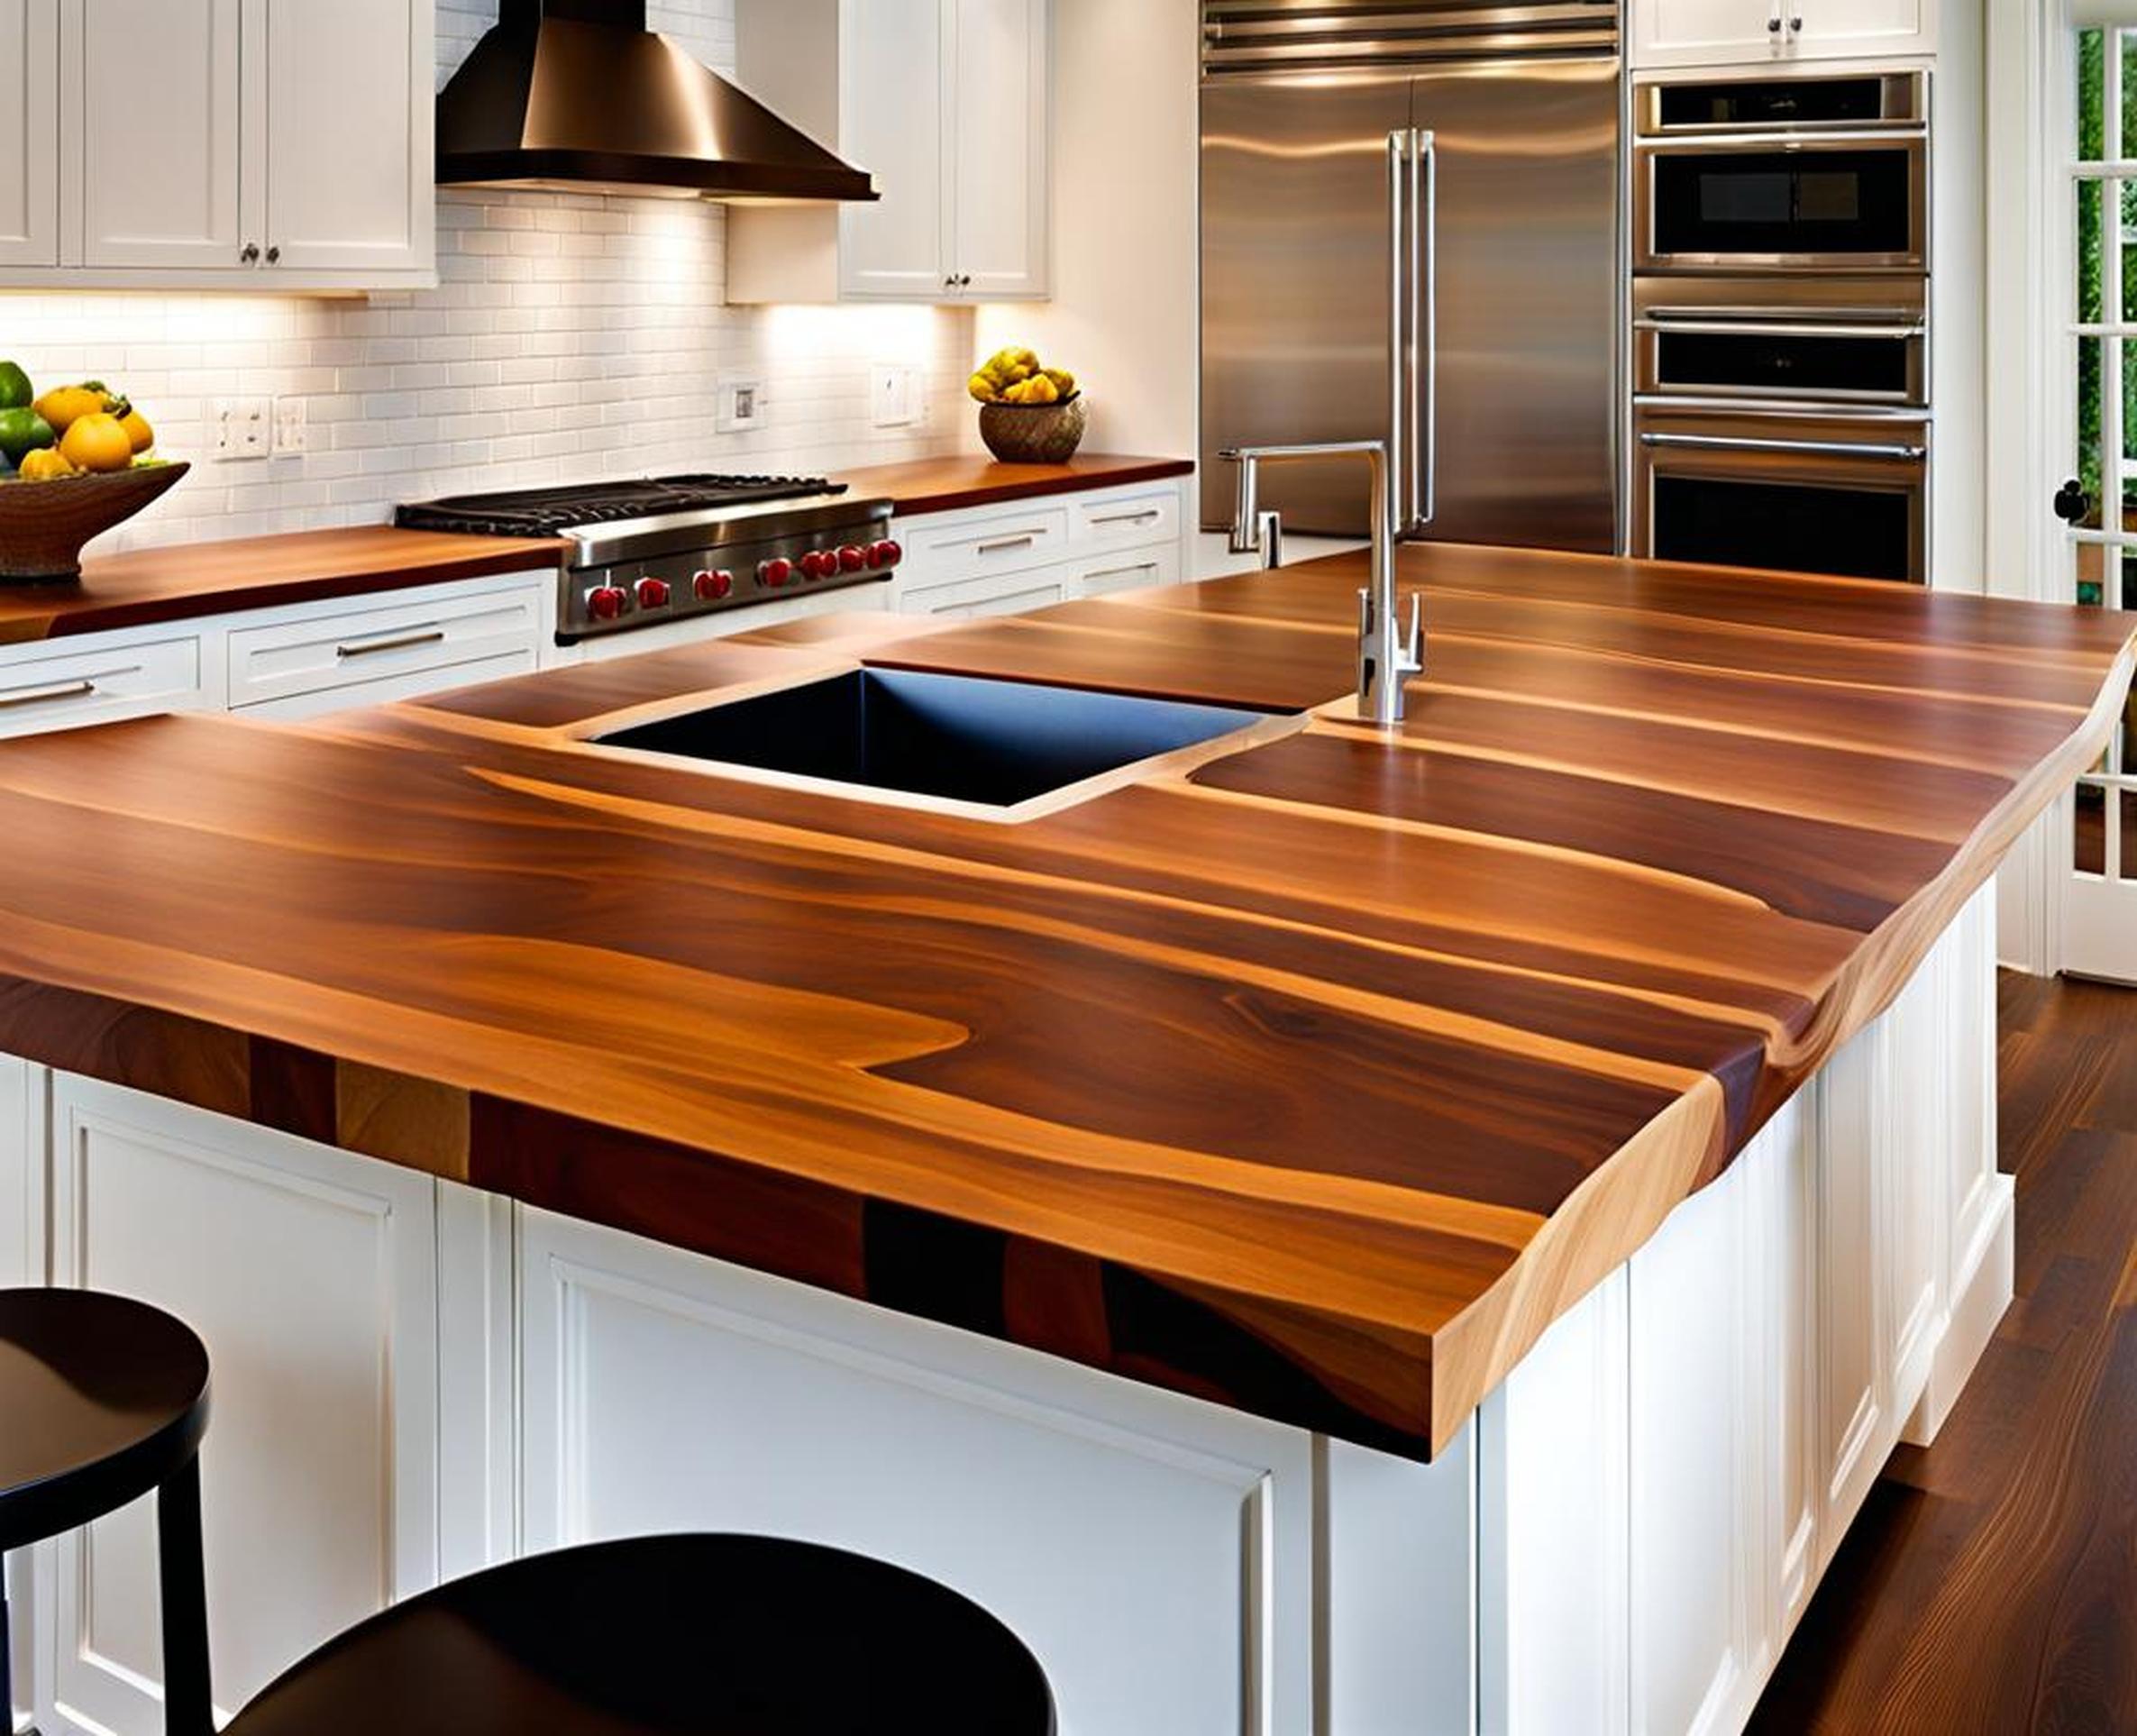 Customize Your Kitchen with Stunning Wood Countertops